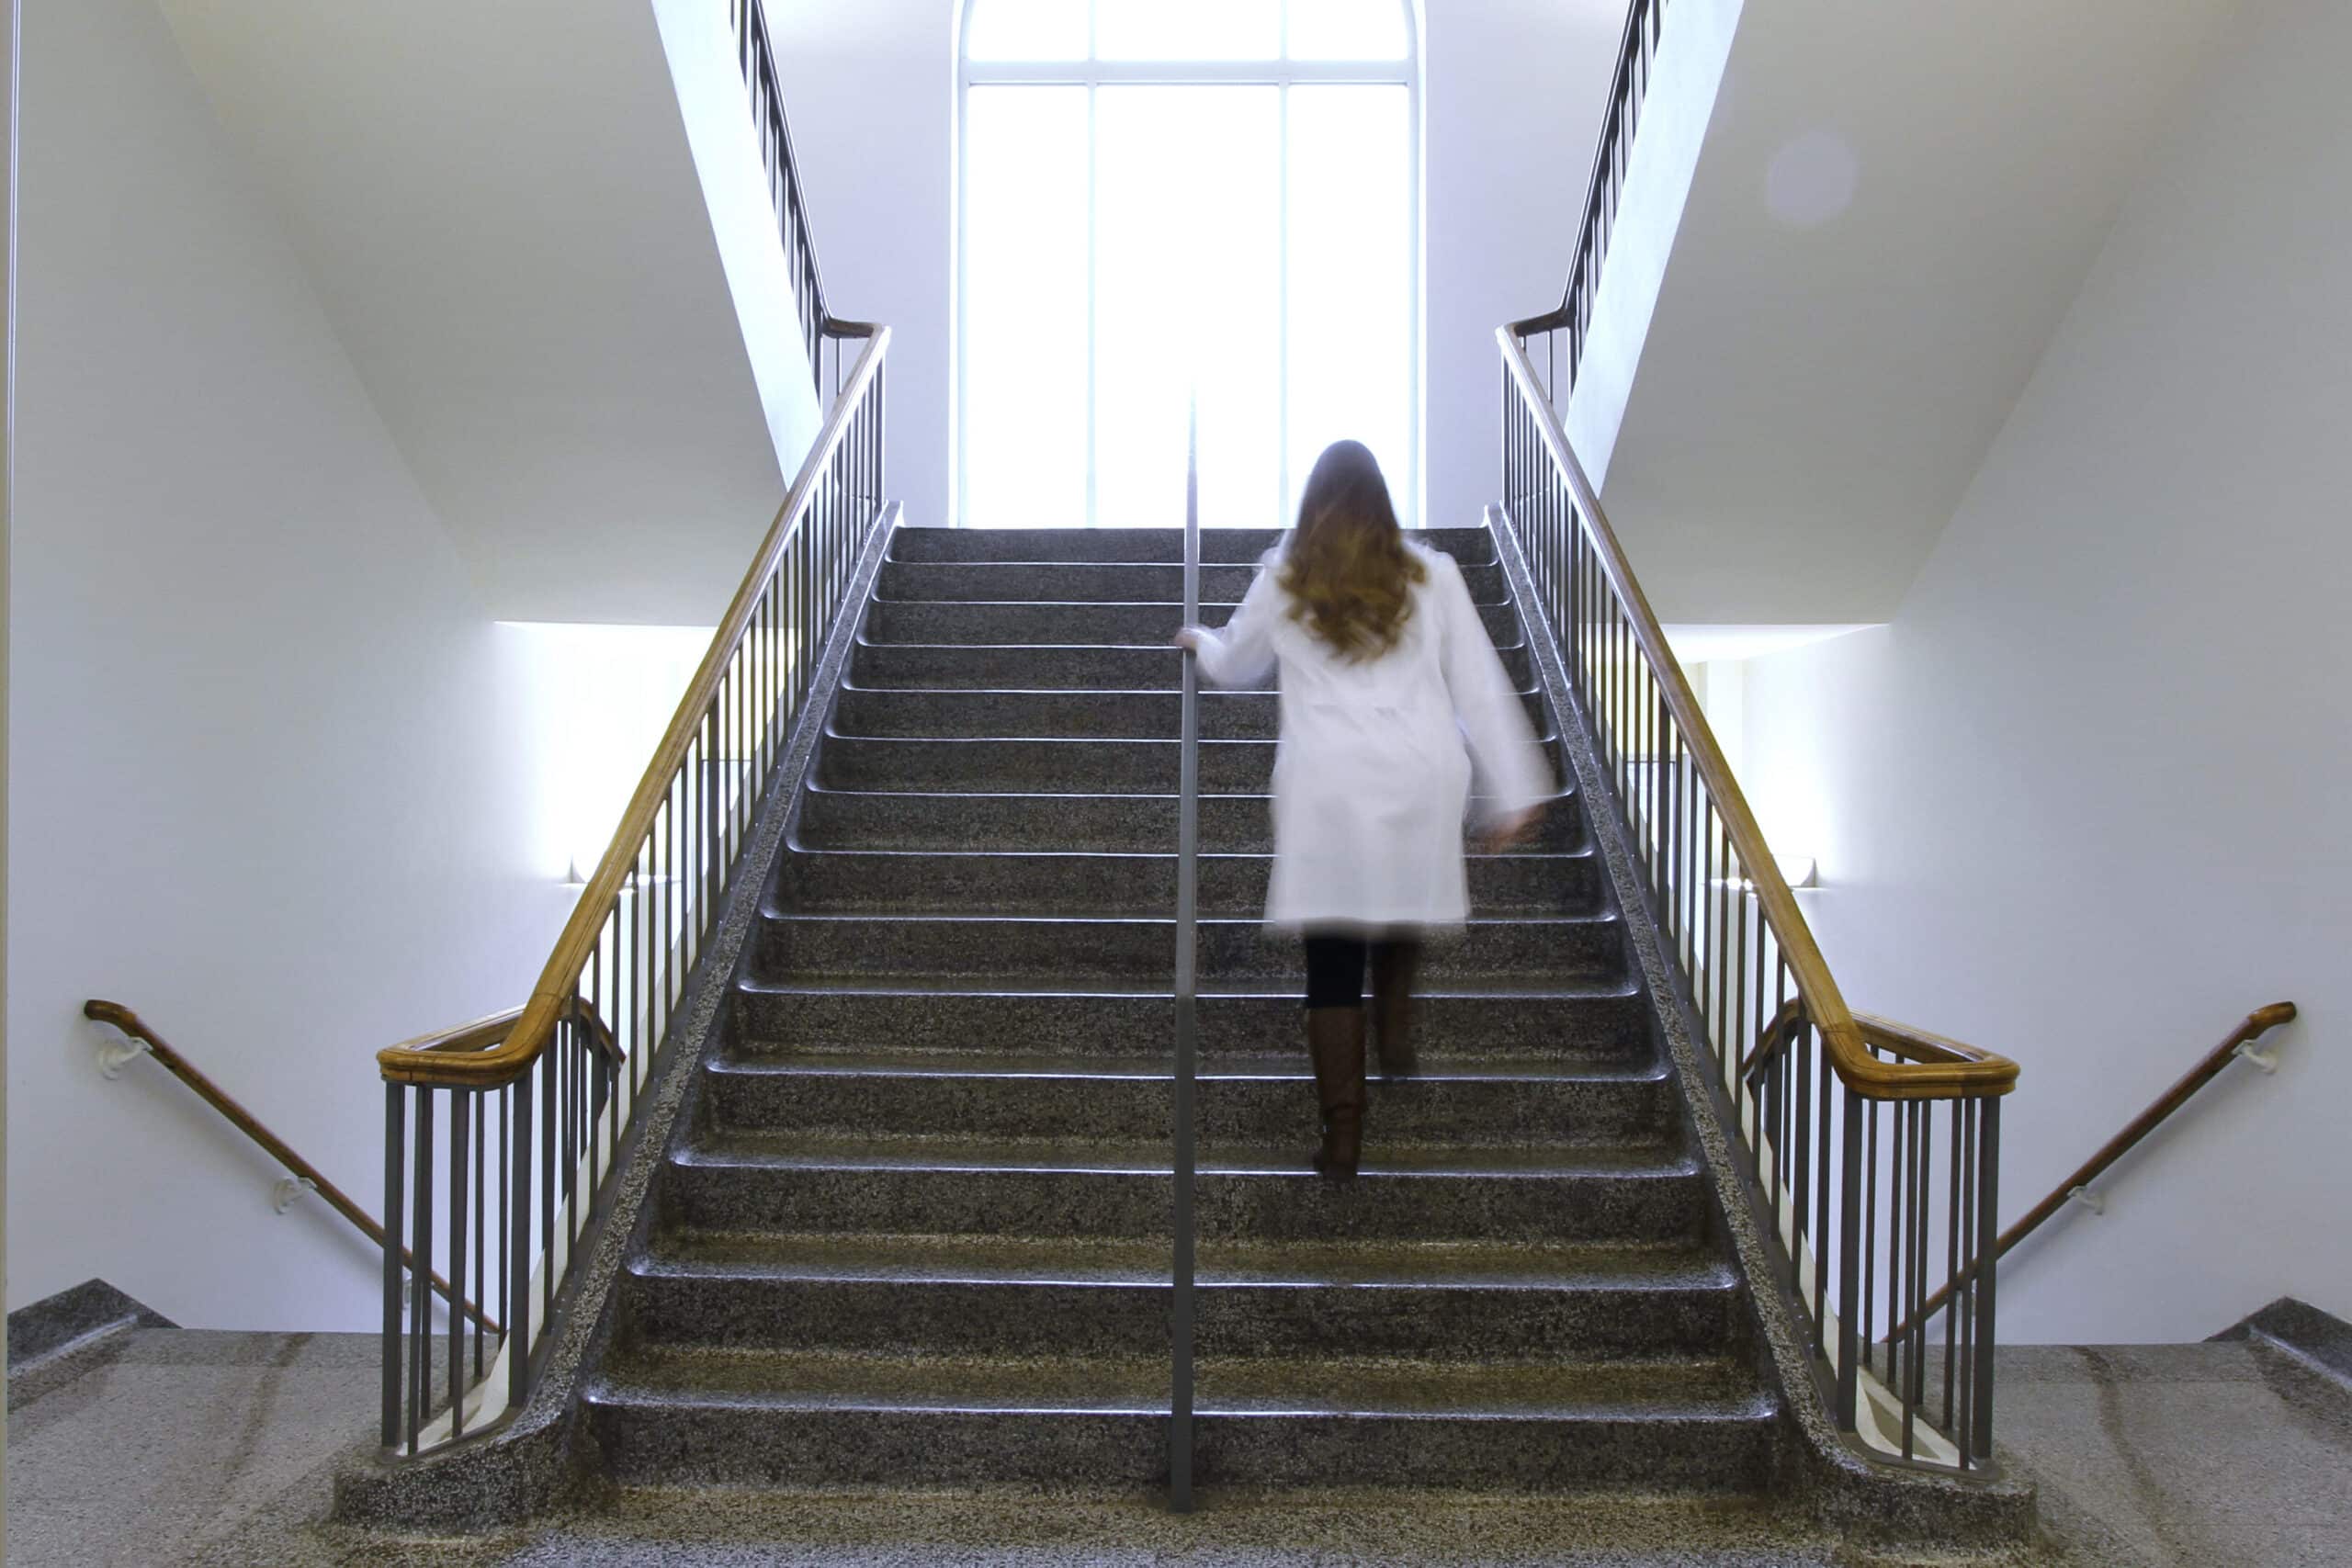 A student in a white coat walking up a staircase in Jones Hall